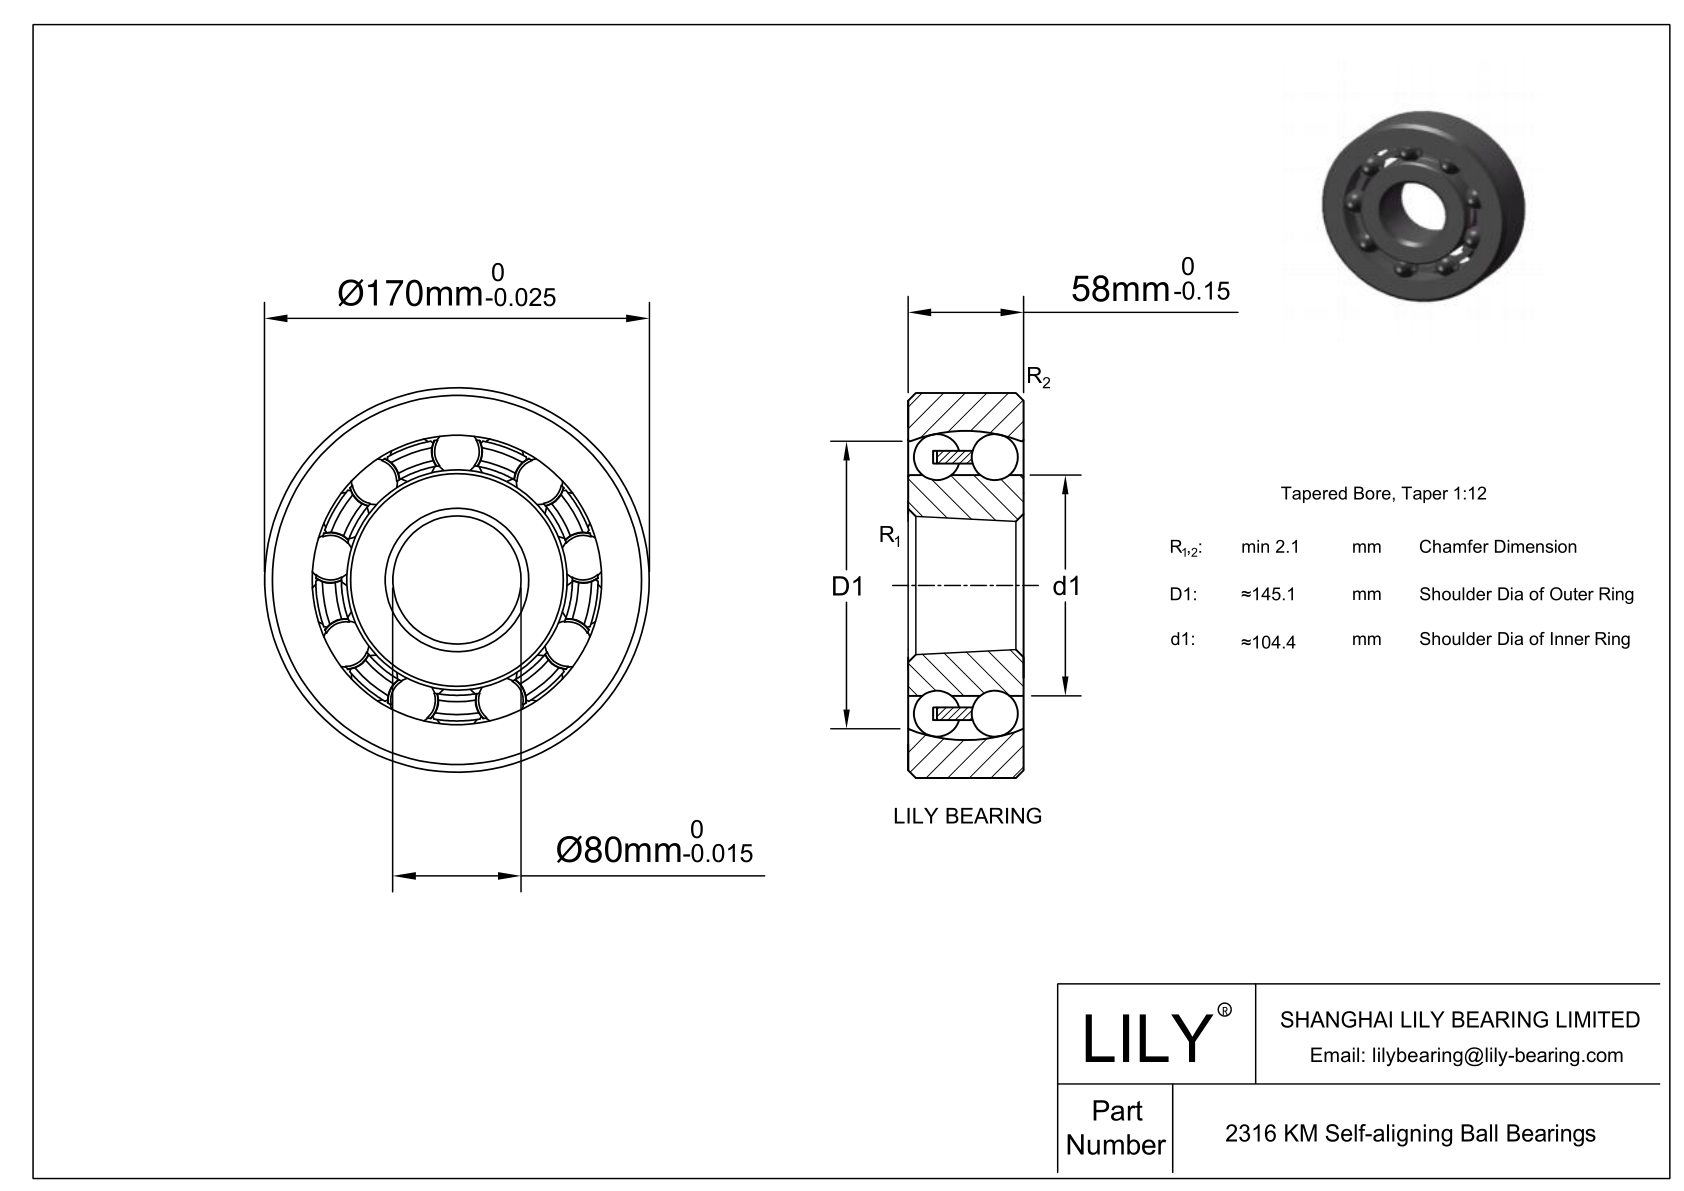 S2316 KM Stainless Steel Self Aligning Ball Bearings cad drawing